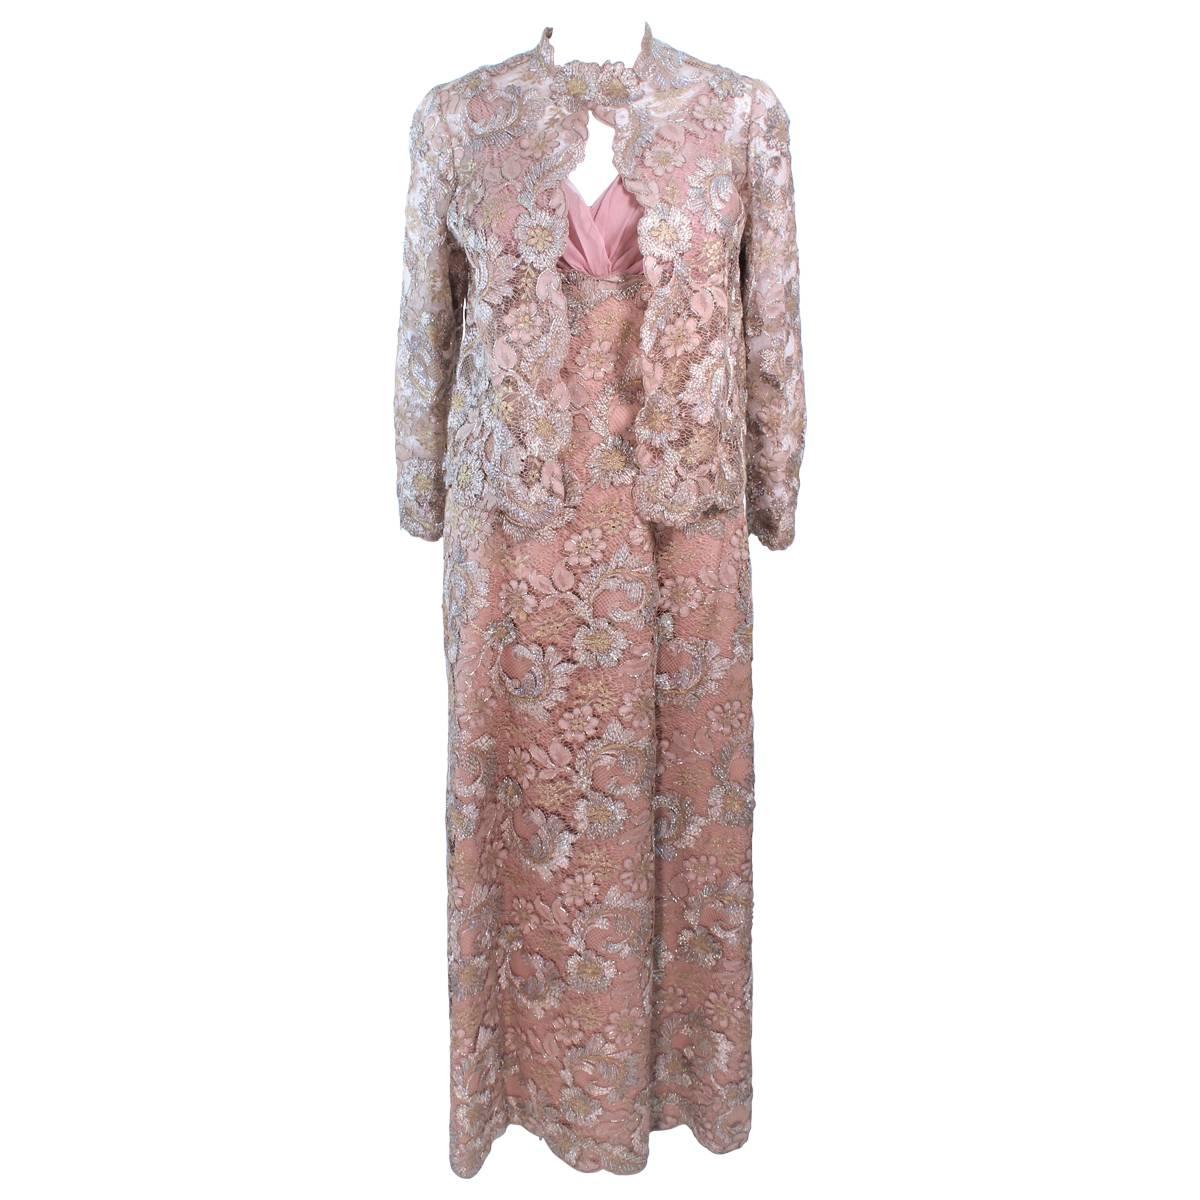 Vintage 1950's Peach Champagne Iridescent Lace Gown and Coat Size 8 10 For Sale